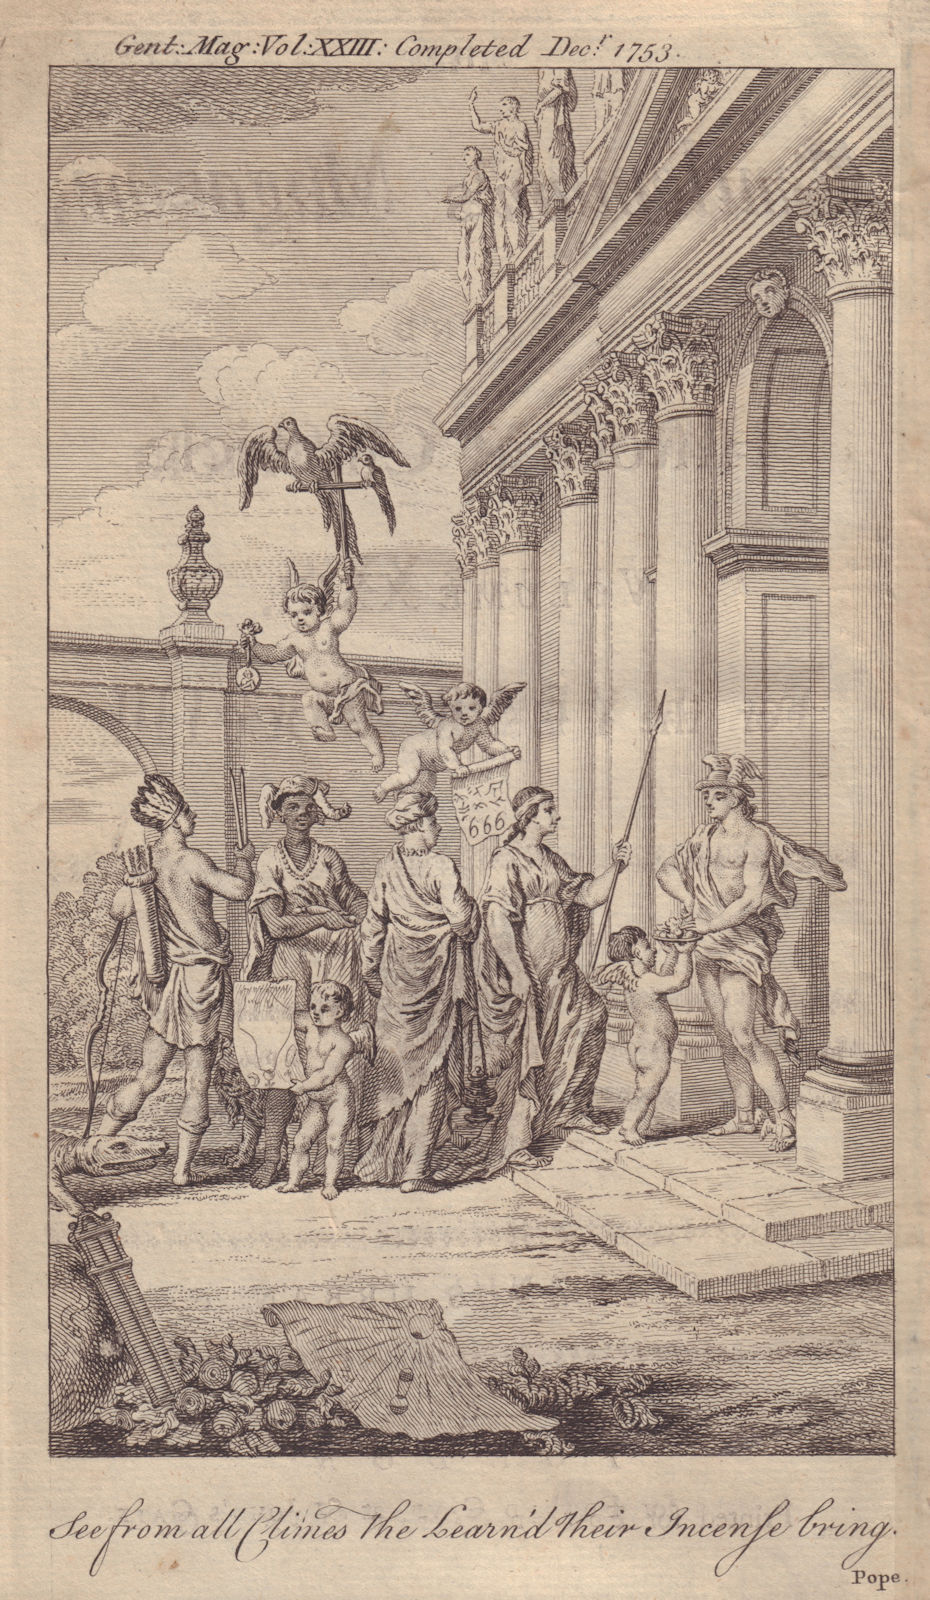 Associate Product Gents mag title. See from all Climes The Learn'd Their Incense bring. Pope 1753